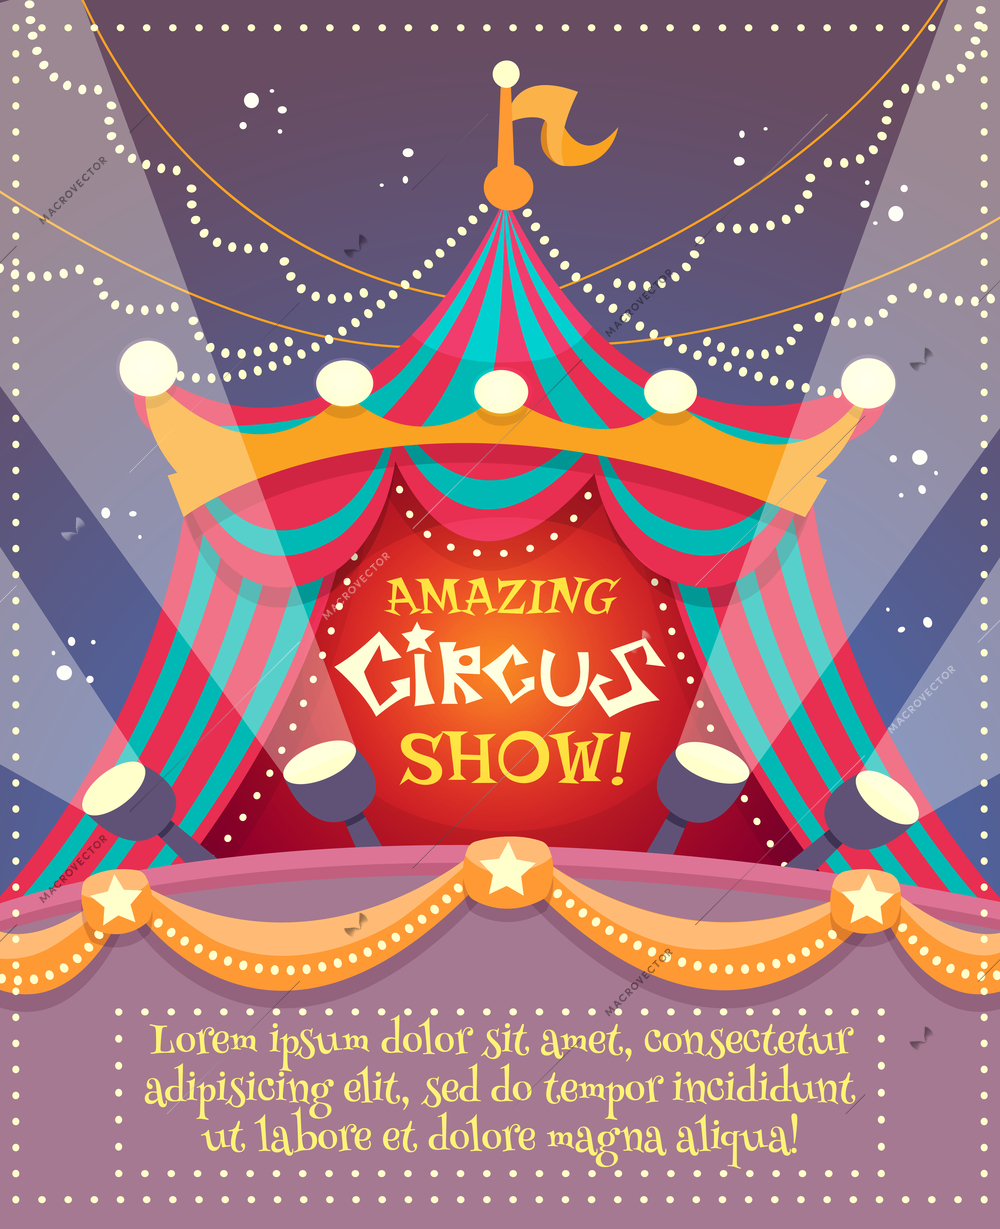 Circus vintage poster with tent and amazing circus show text vector illustration